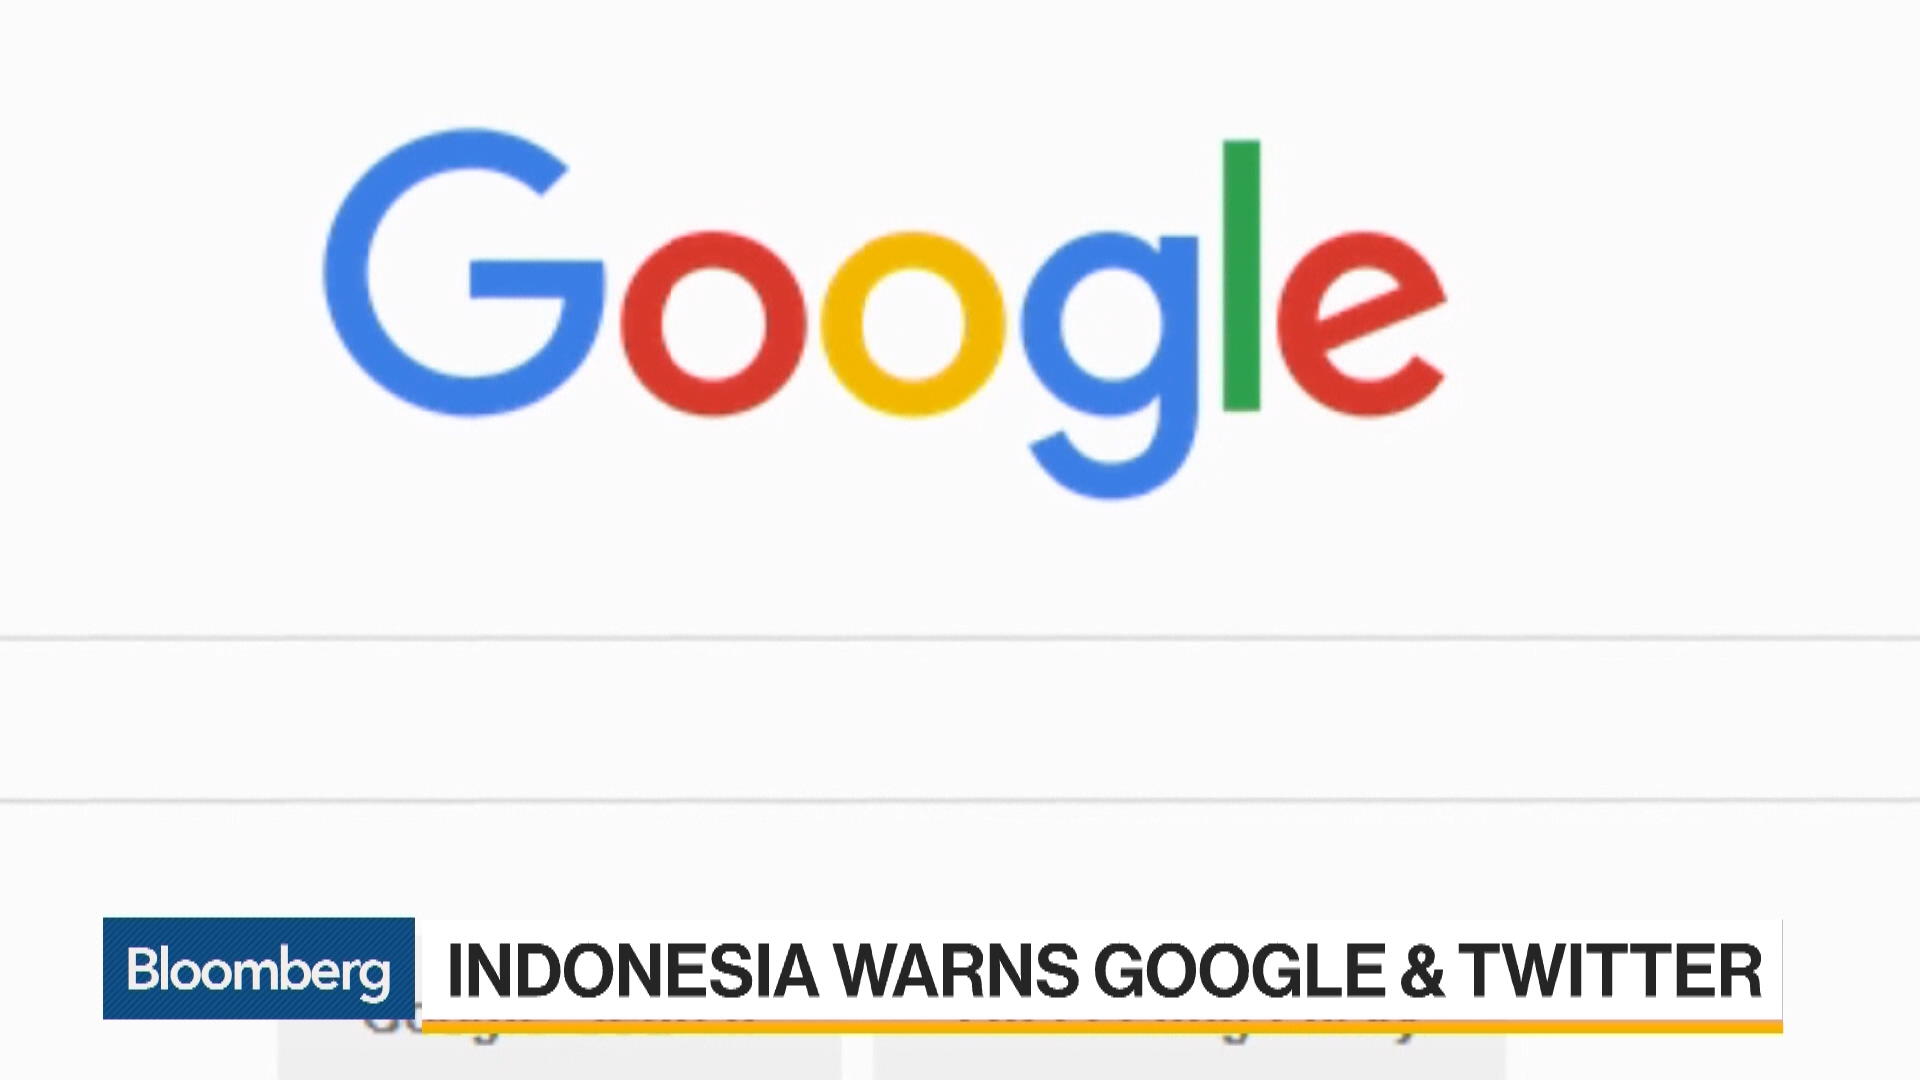 Bleckid - Block Porn or Be Blocked, Indonesia Warns Google, Twitter - Bloomberg